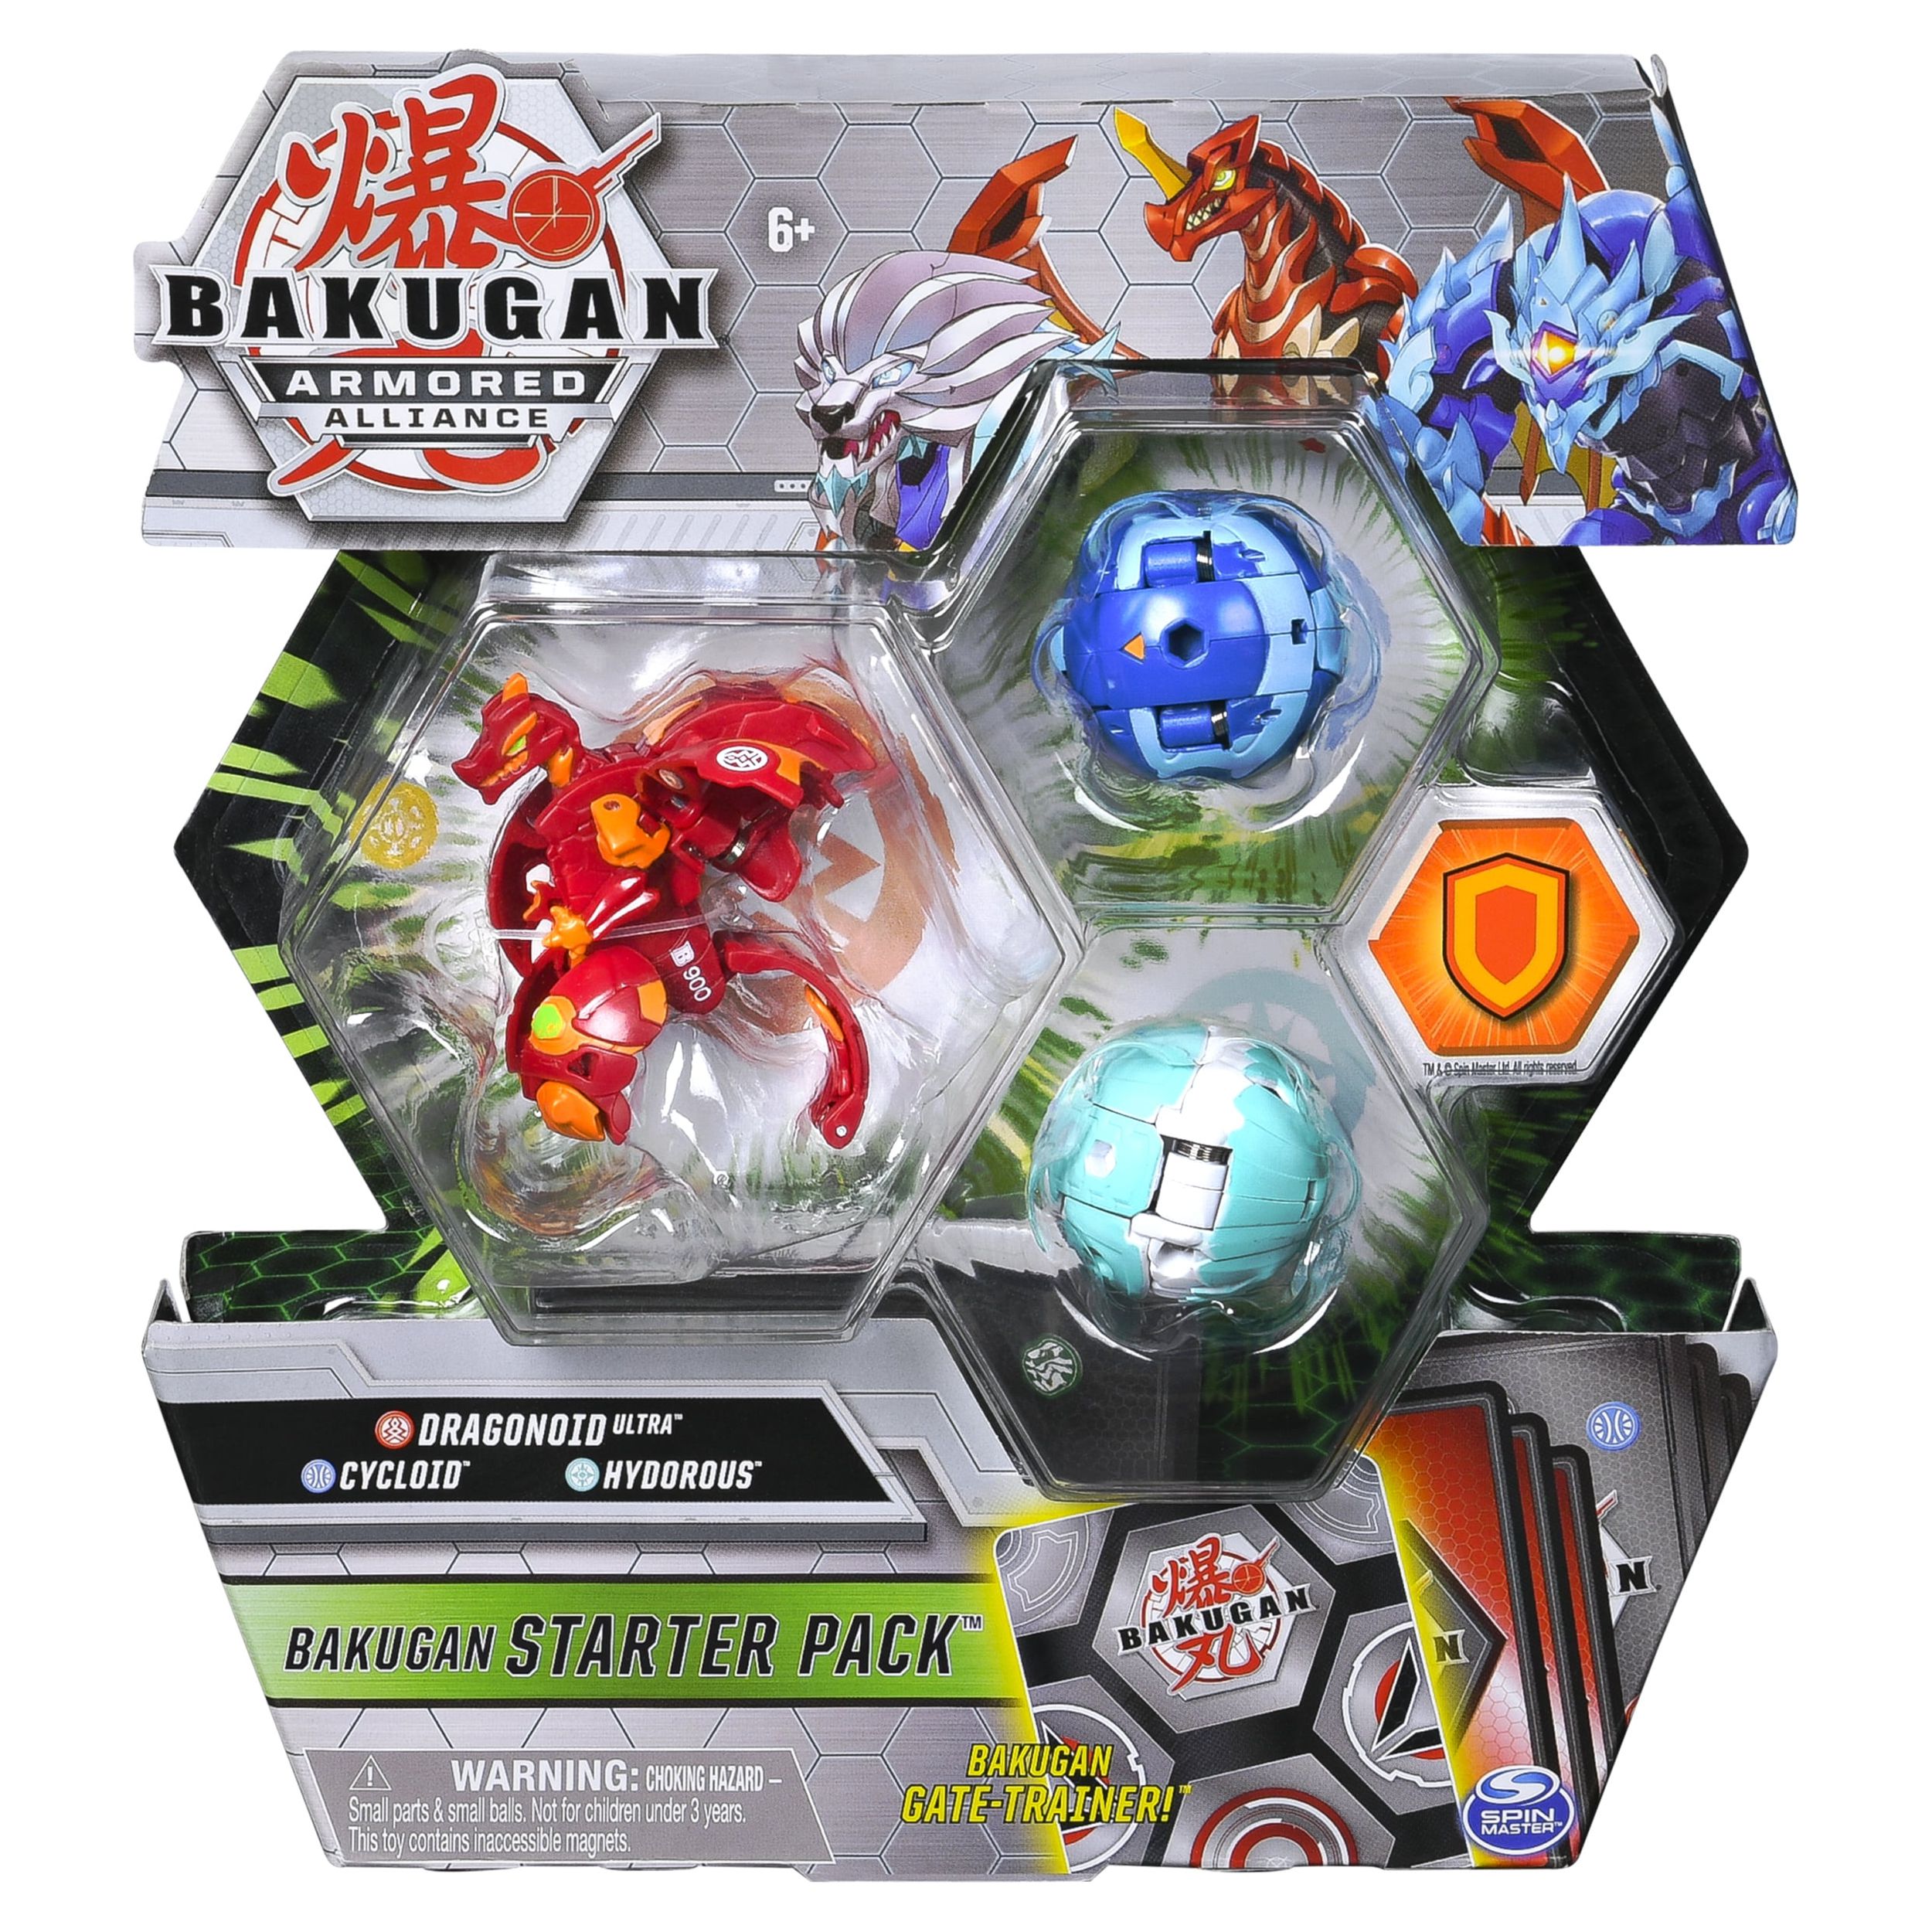 Bakugan Starter Pack 3-Pack, Dragonoid Ultra, Armored Alliance Collectible Action Figures - image 1 of 5